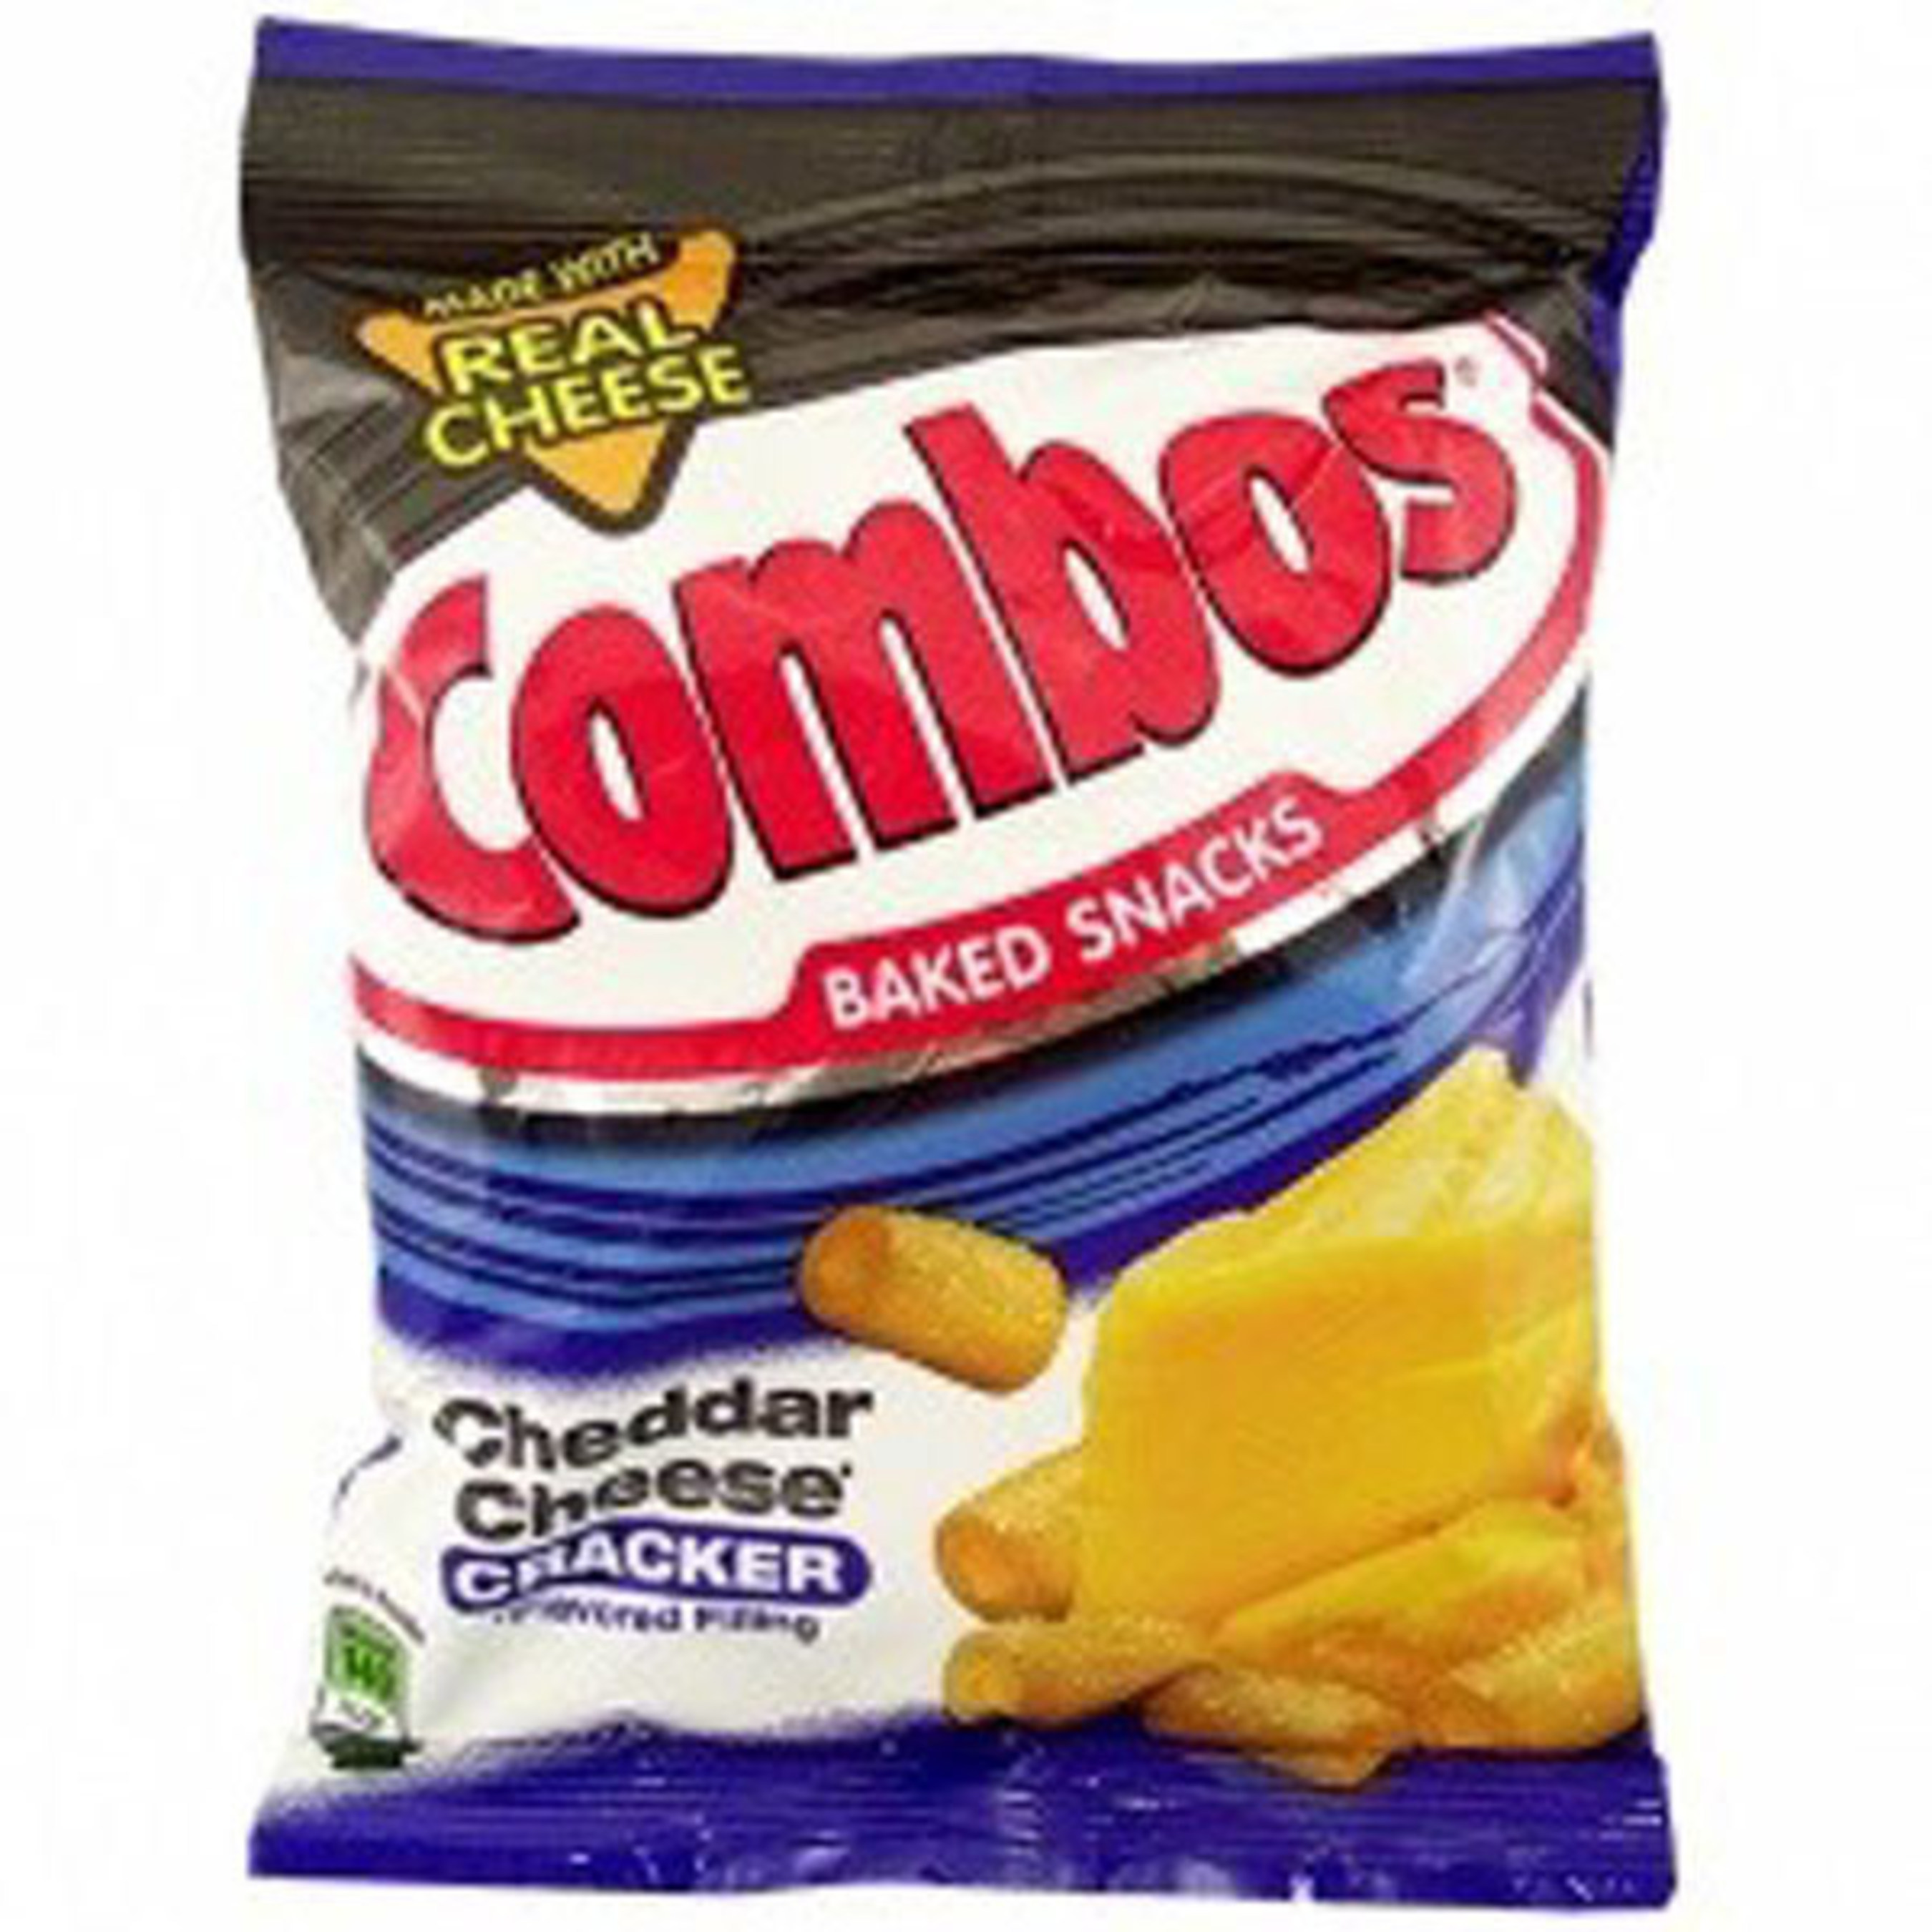 COMBOS CHEDDAR CHEESE CRACKER - FAMILY PEG PACK - 6.3 OZ - 12/CA